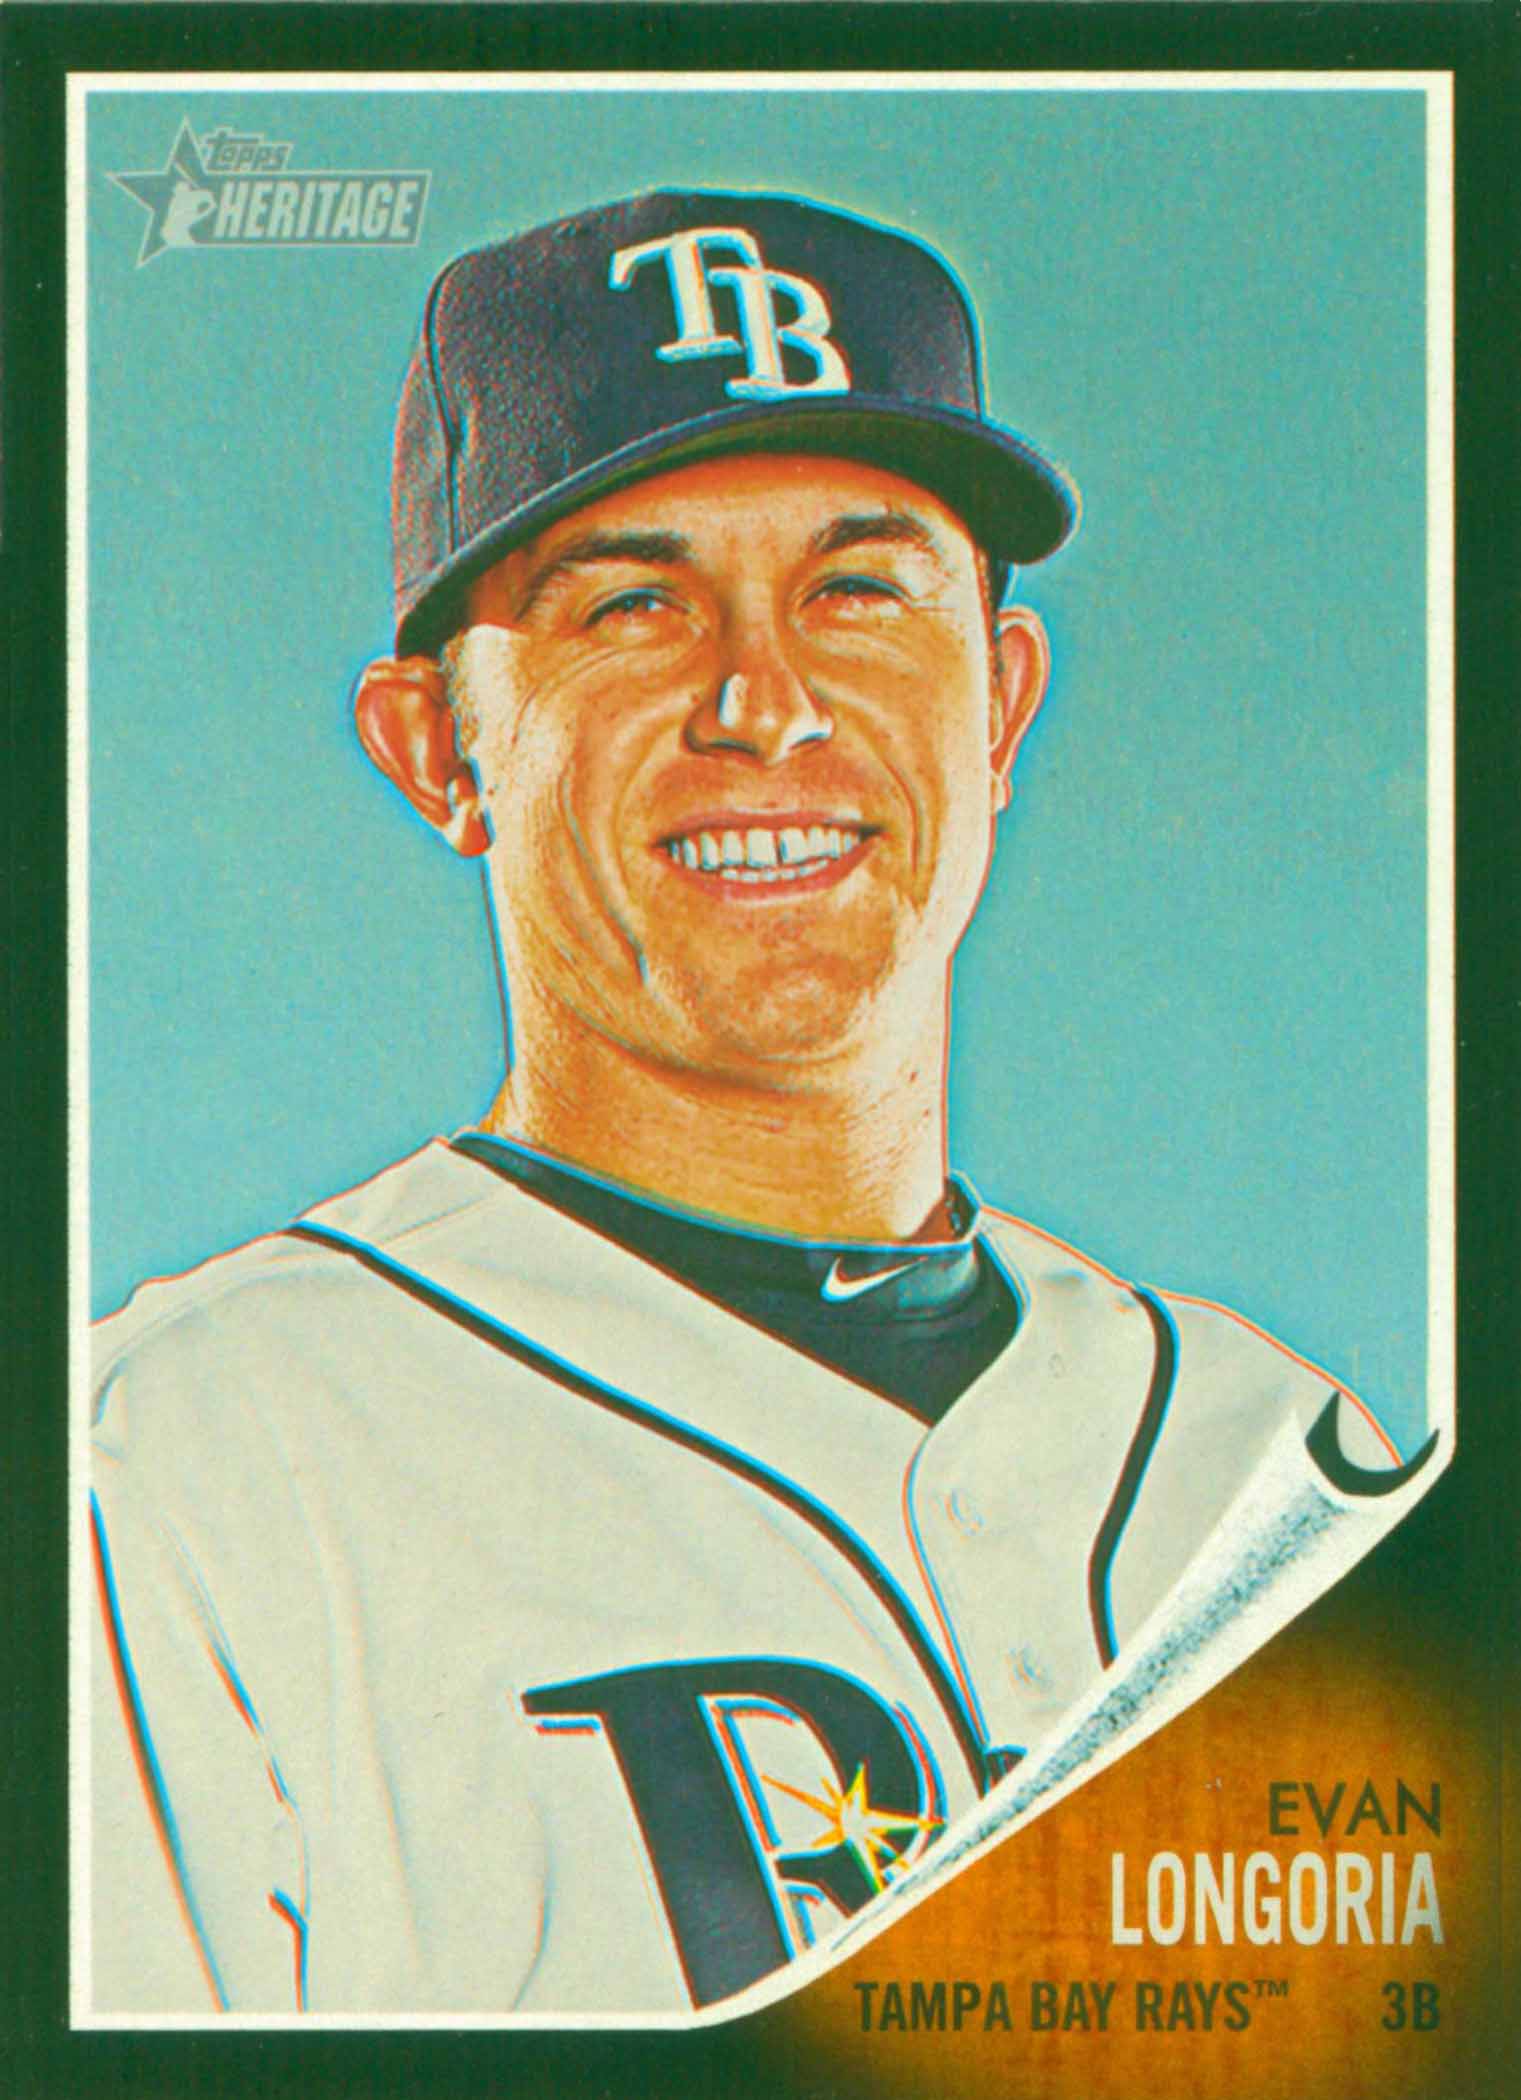  2017 Topps Archives #28 Evan Longoria Tampa Bay Rays Baseball  Card : Collectibles & Fine Art